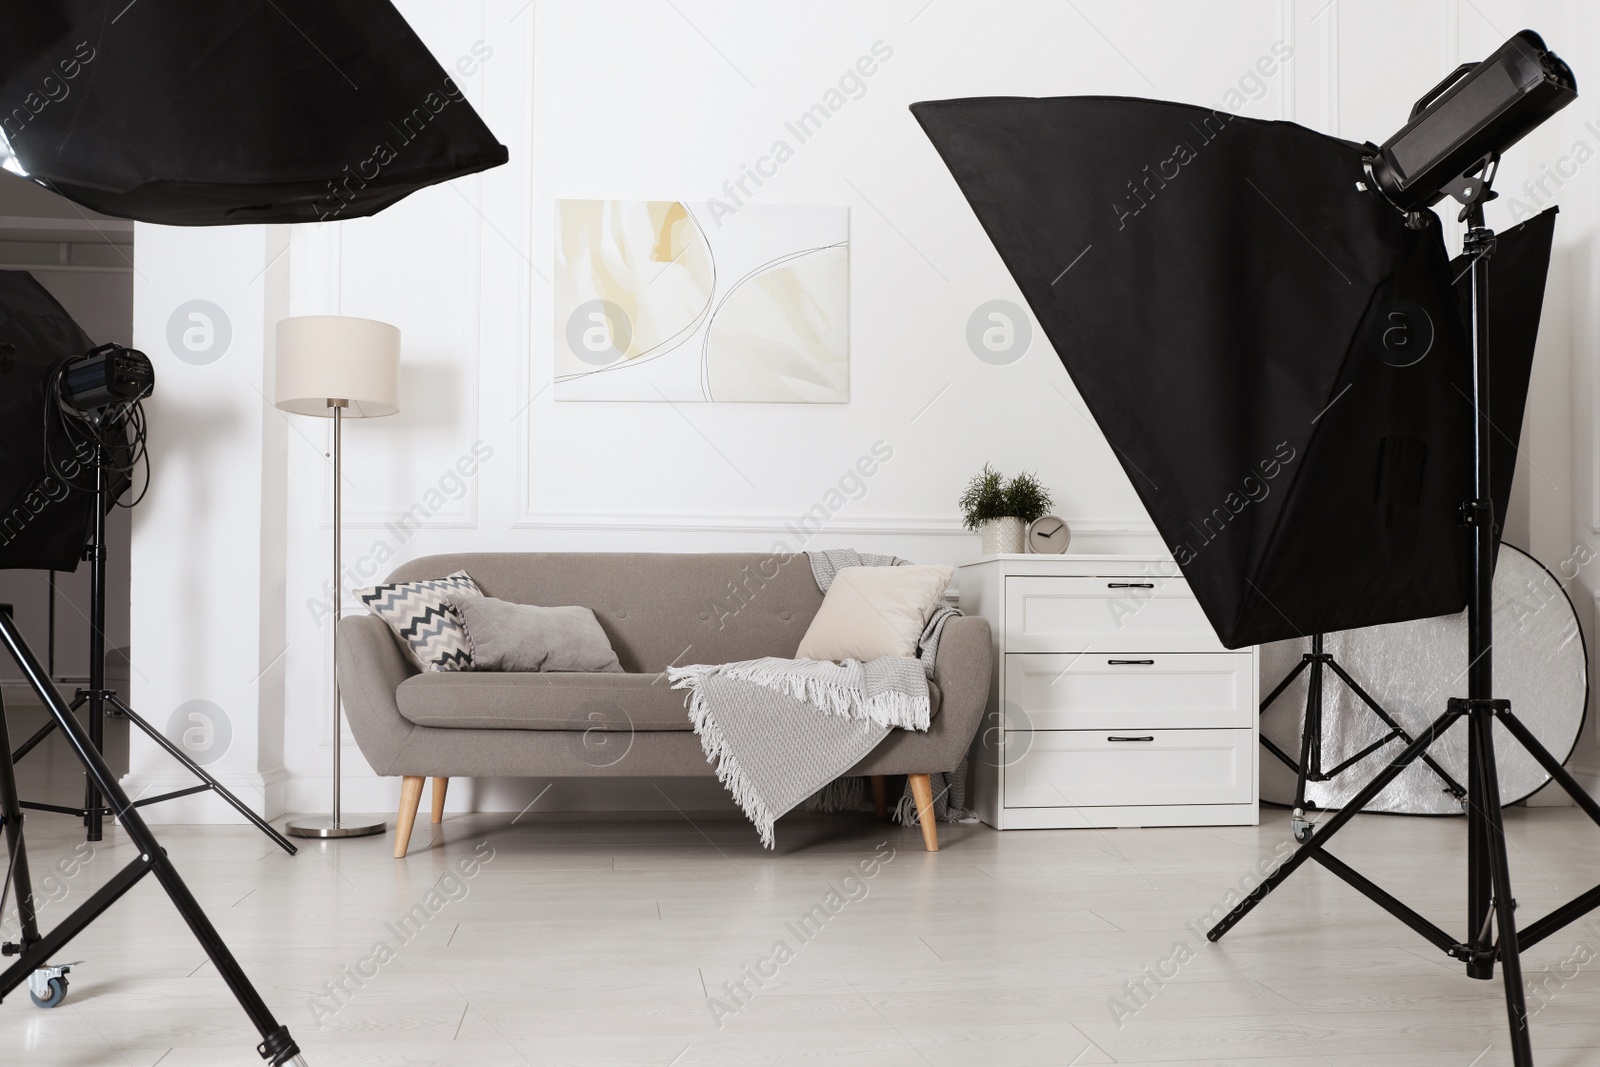 Photo of Set of stylish furniture surrounded by professional lighting equipment in photo studio. Cozy living room interior imitation